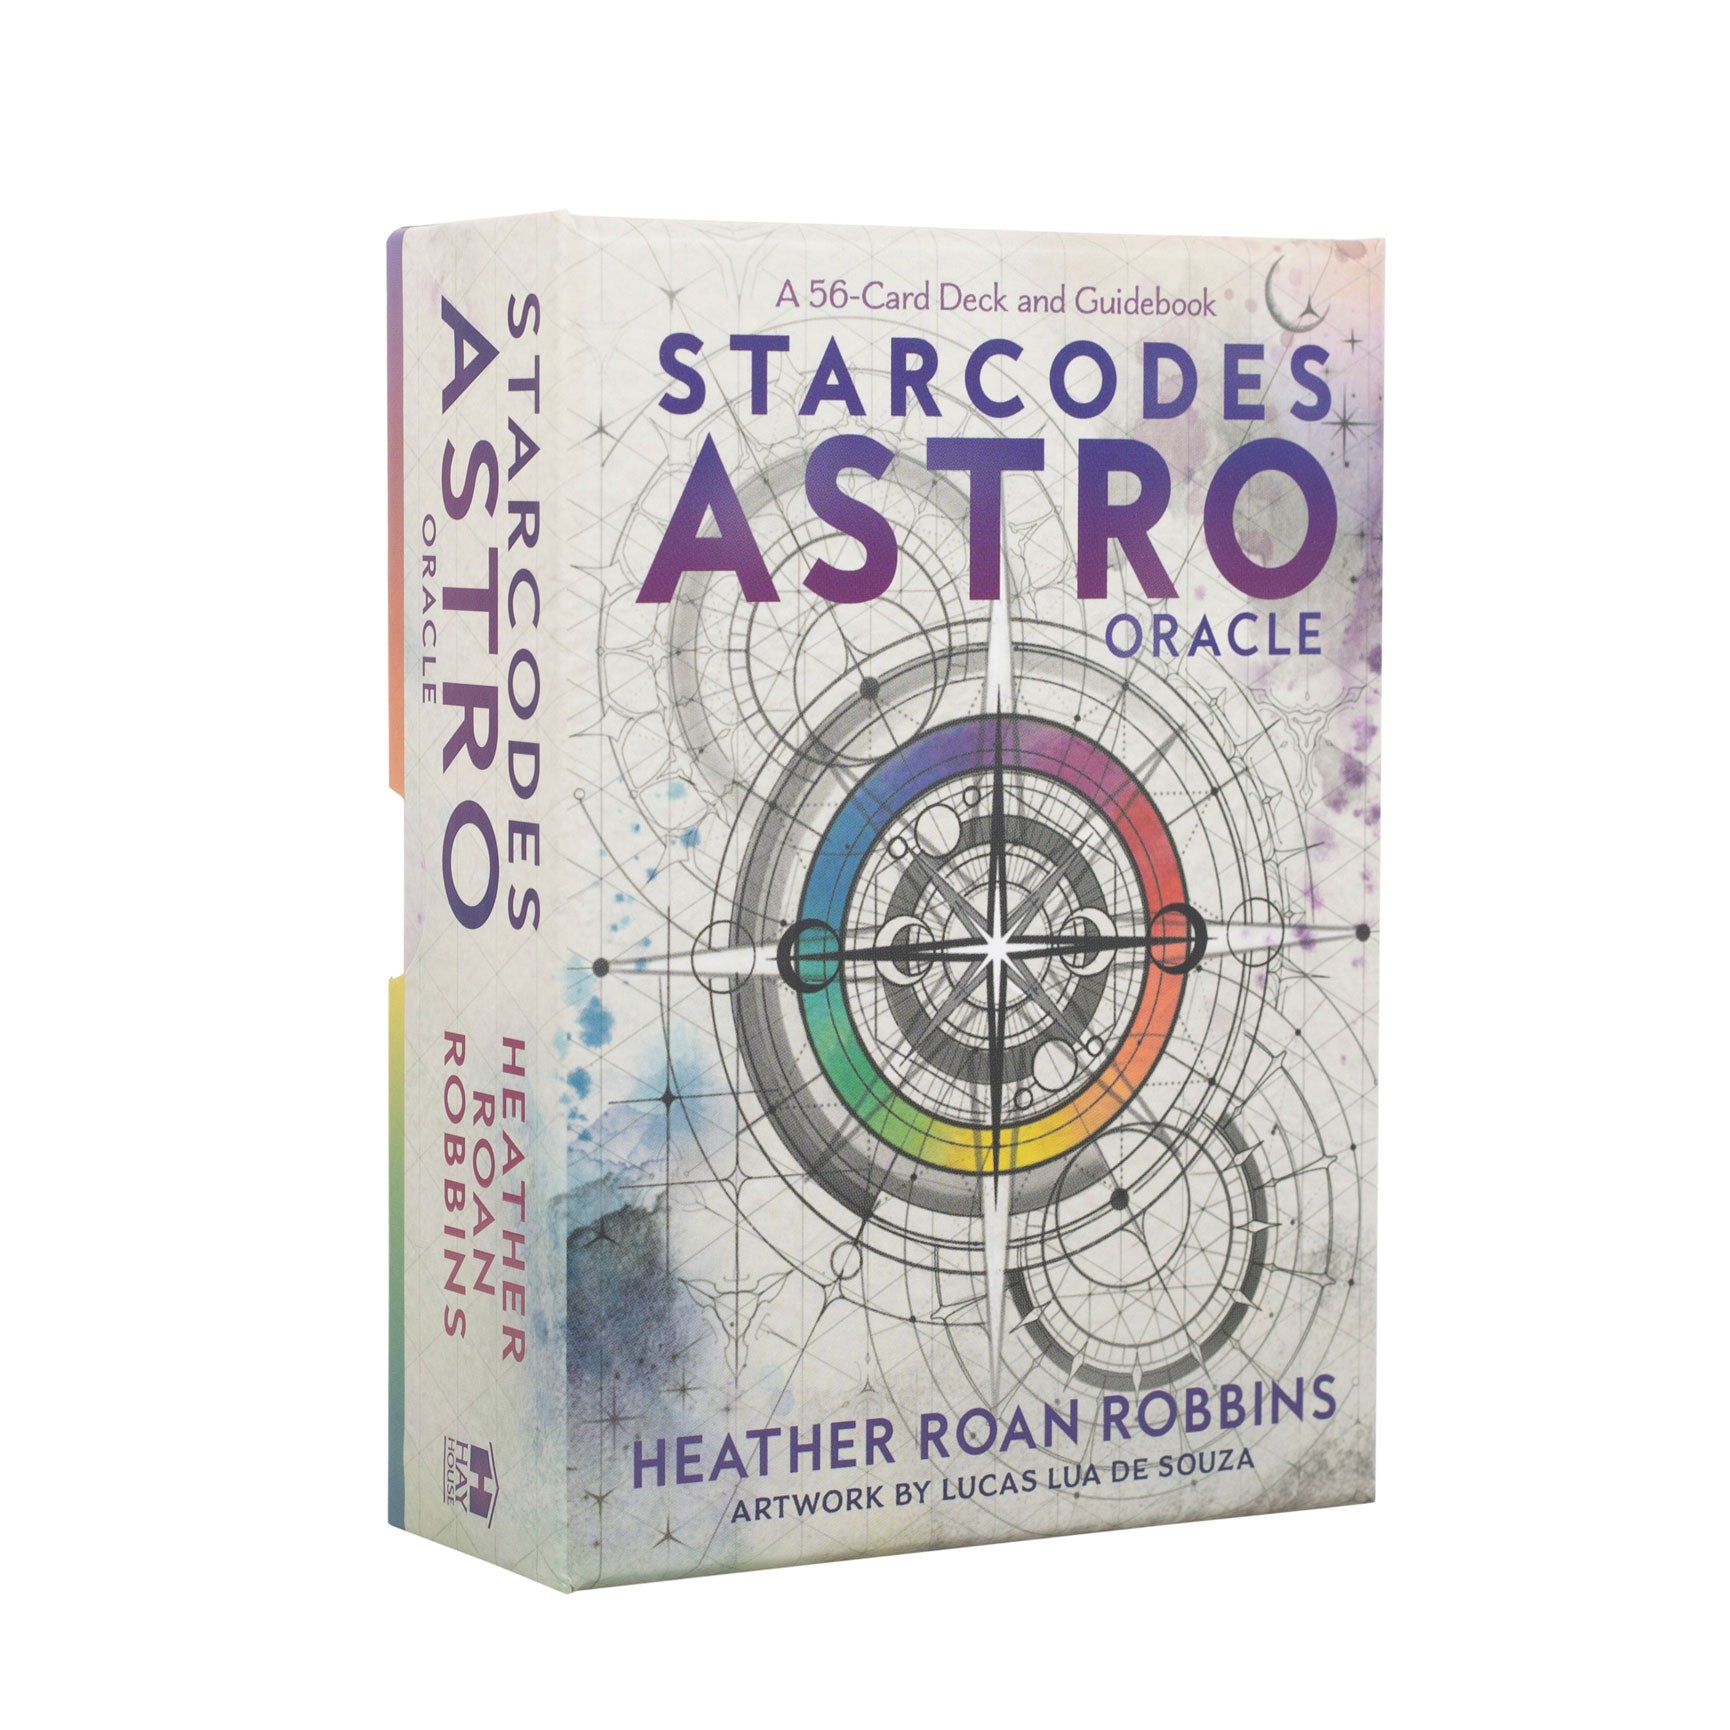 View Starcodes Astro Oracle Cards information